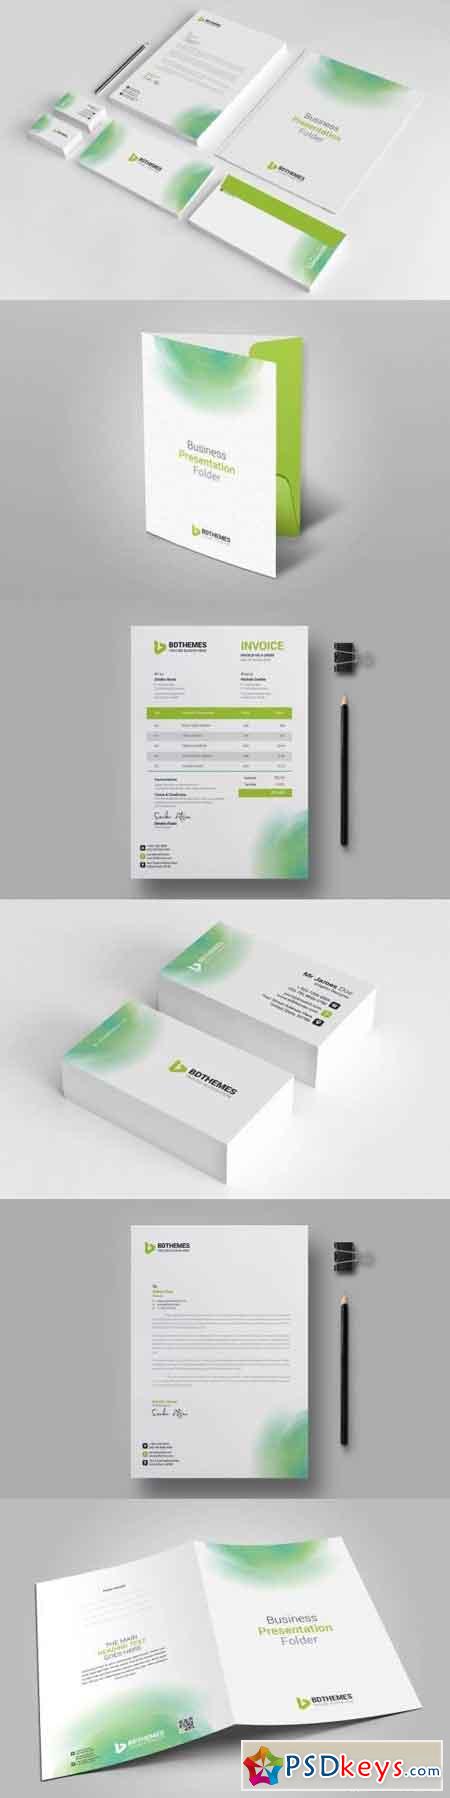 Business Stationery Template 16